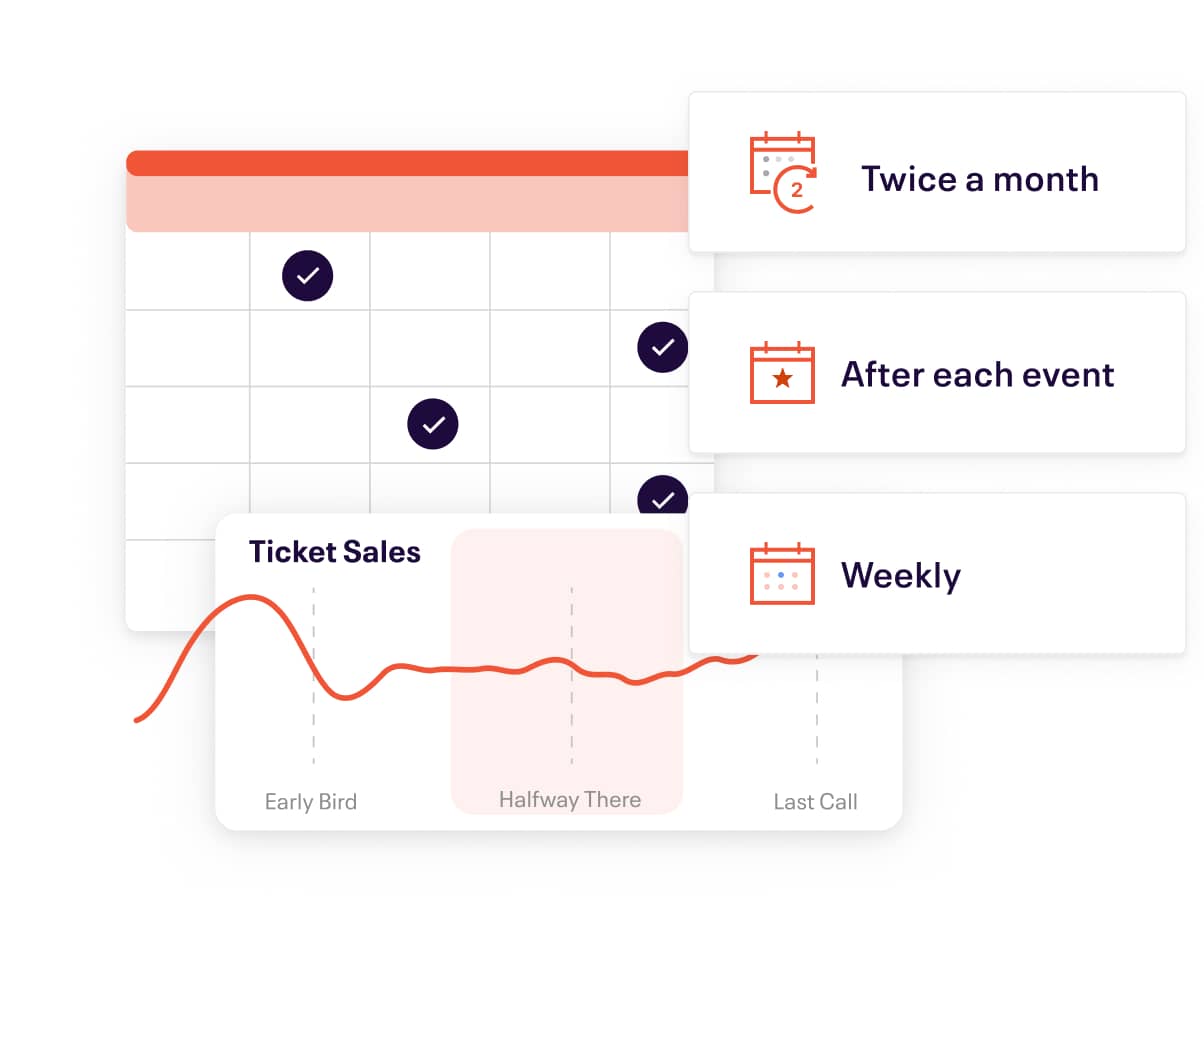 UI elements of Eventbrite's interface showing the different options to schedule a payment: twice a month, after each event or weekly.